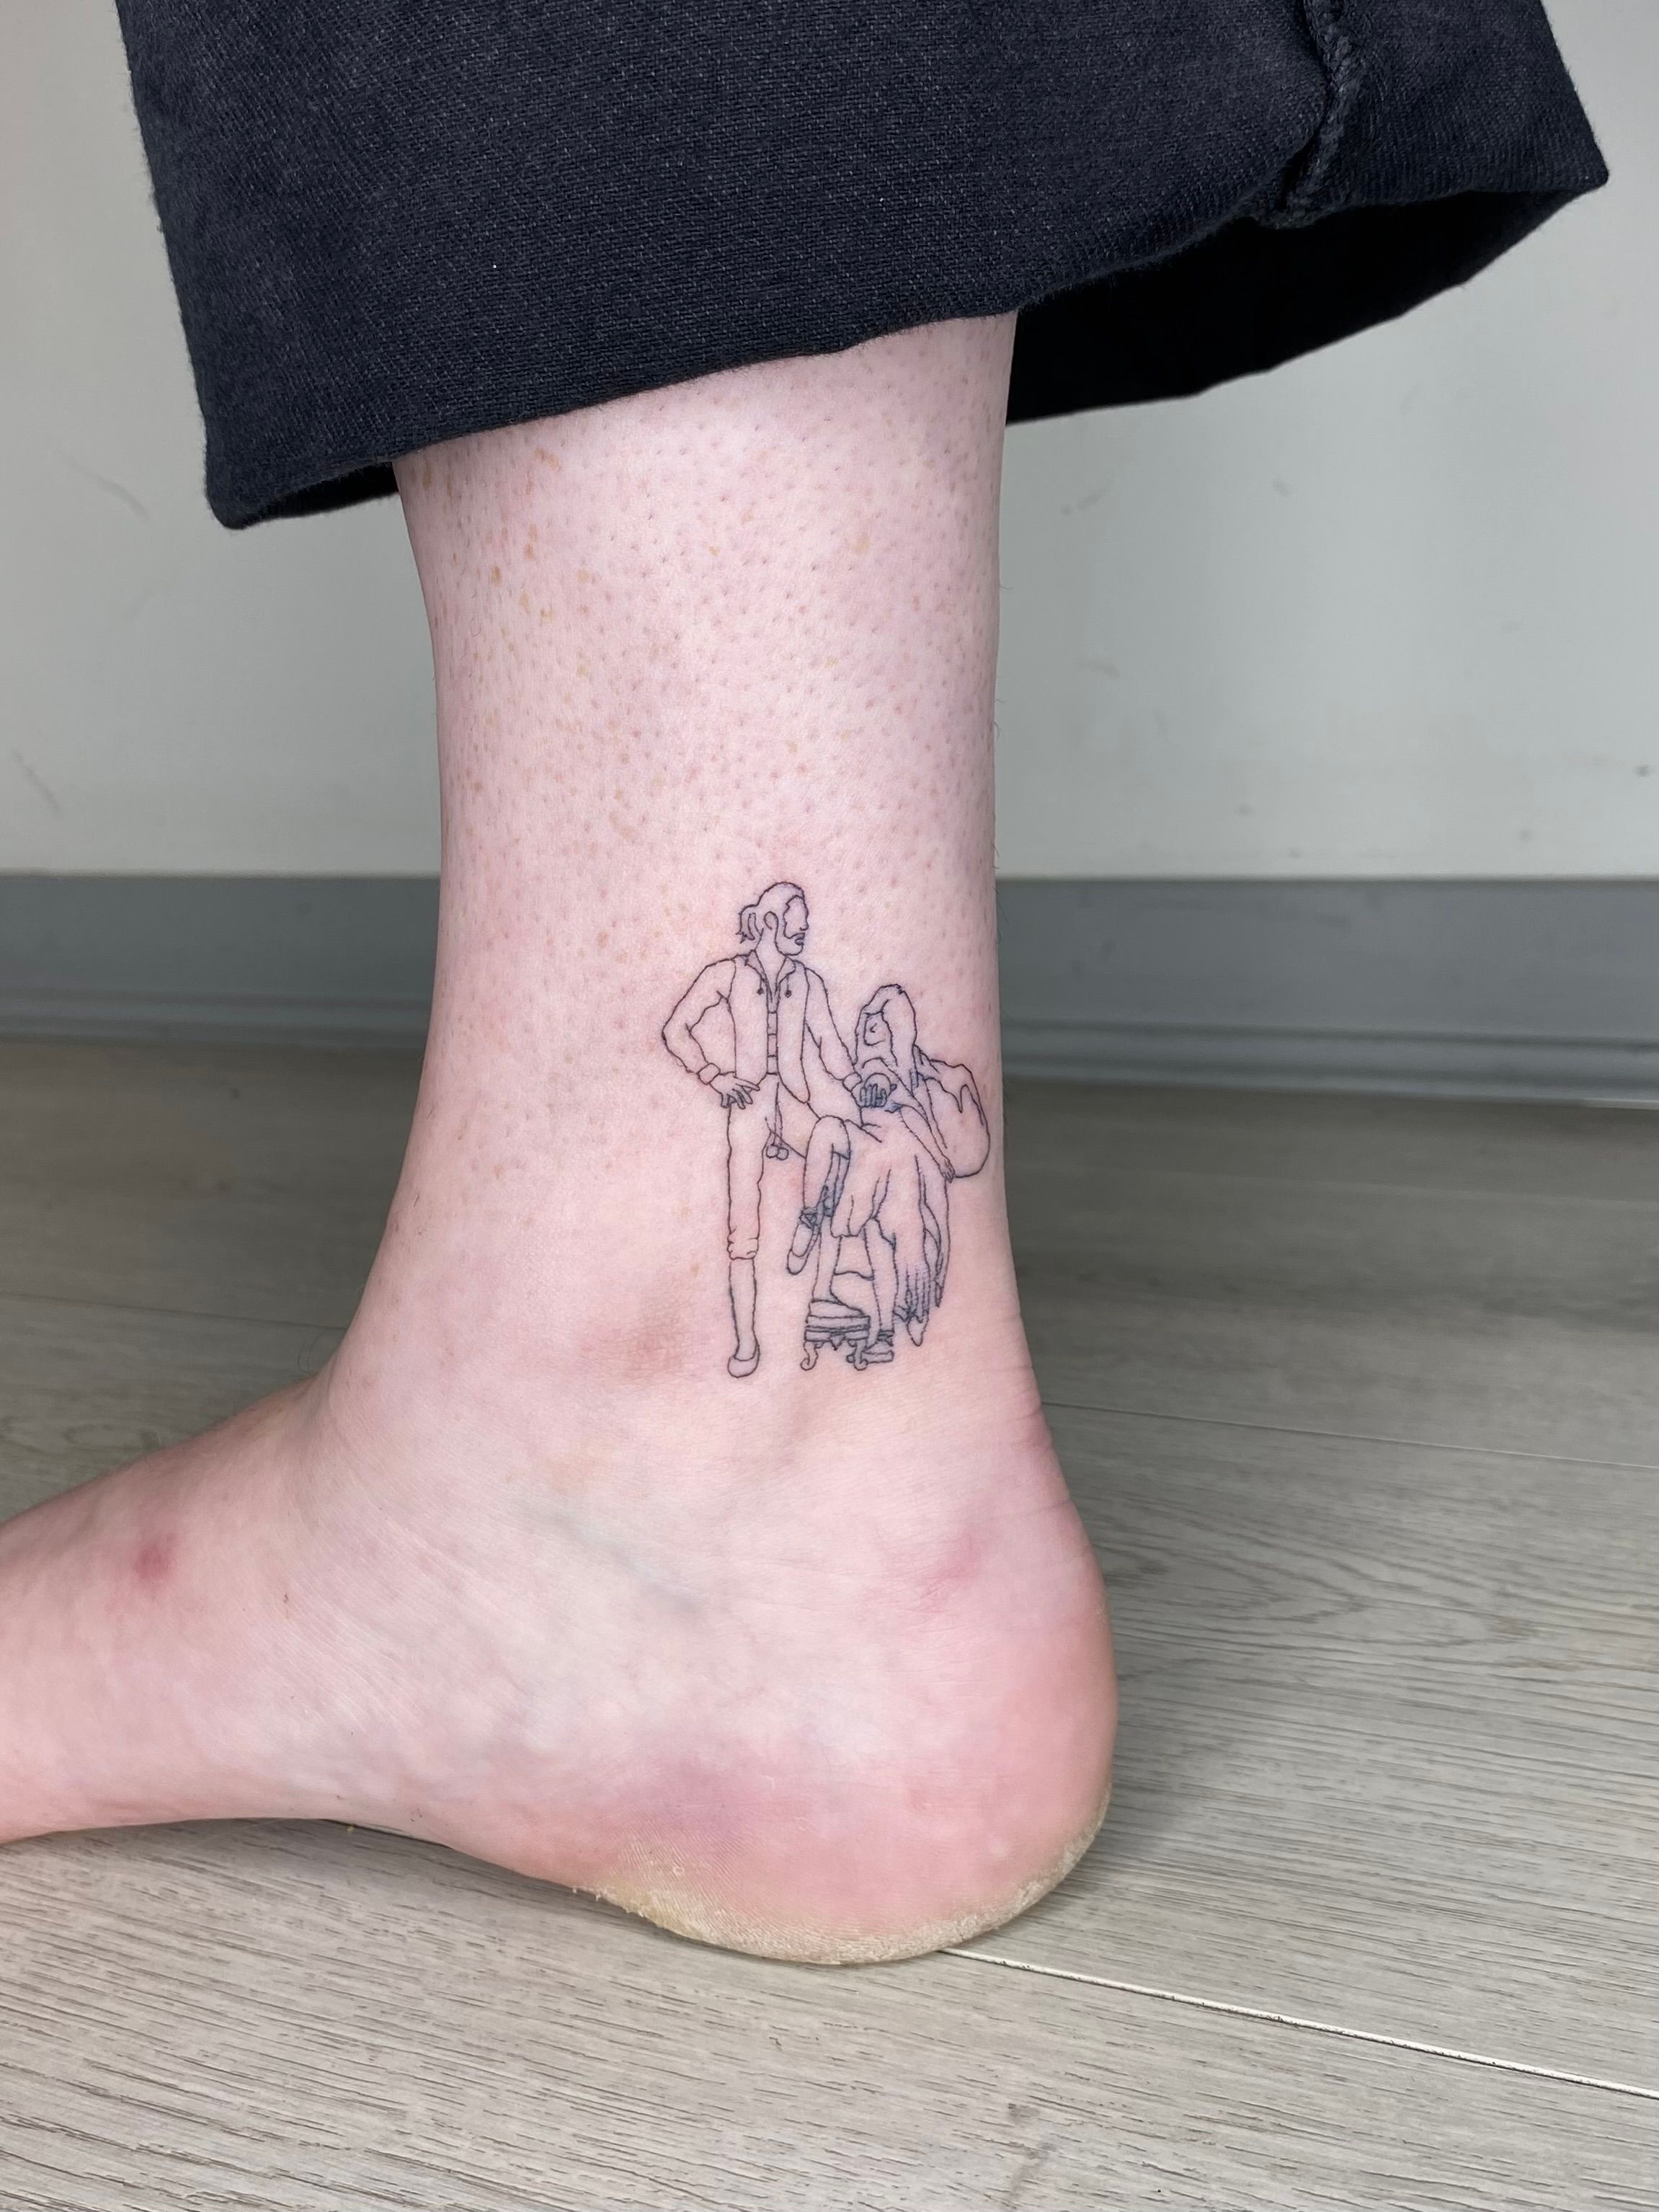 Chart Tattoos: Yes They Exist - The Data Visualisation Catalogue Blog